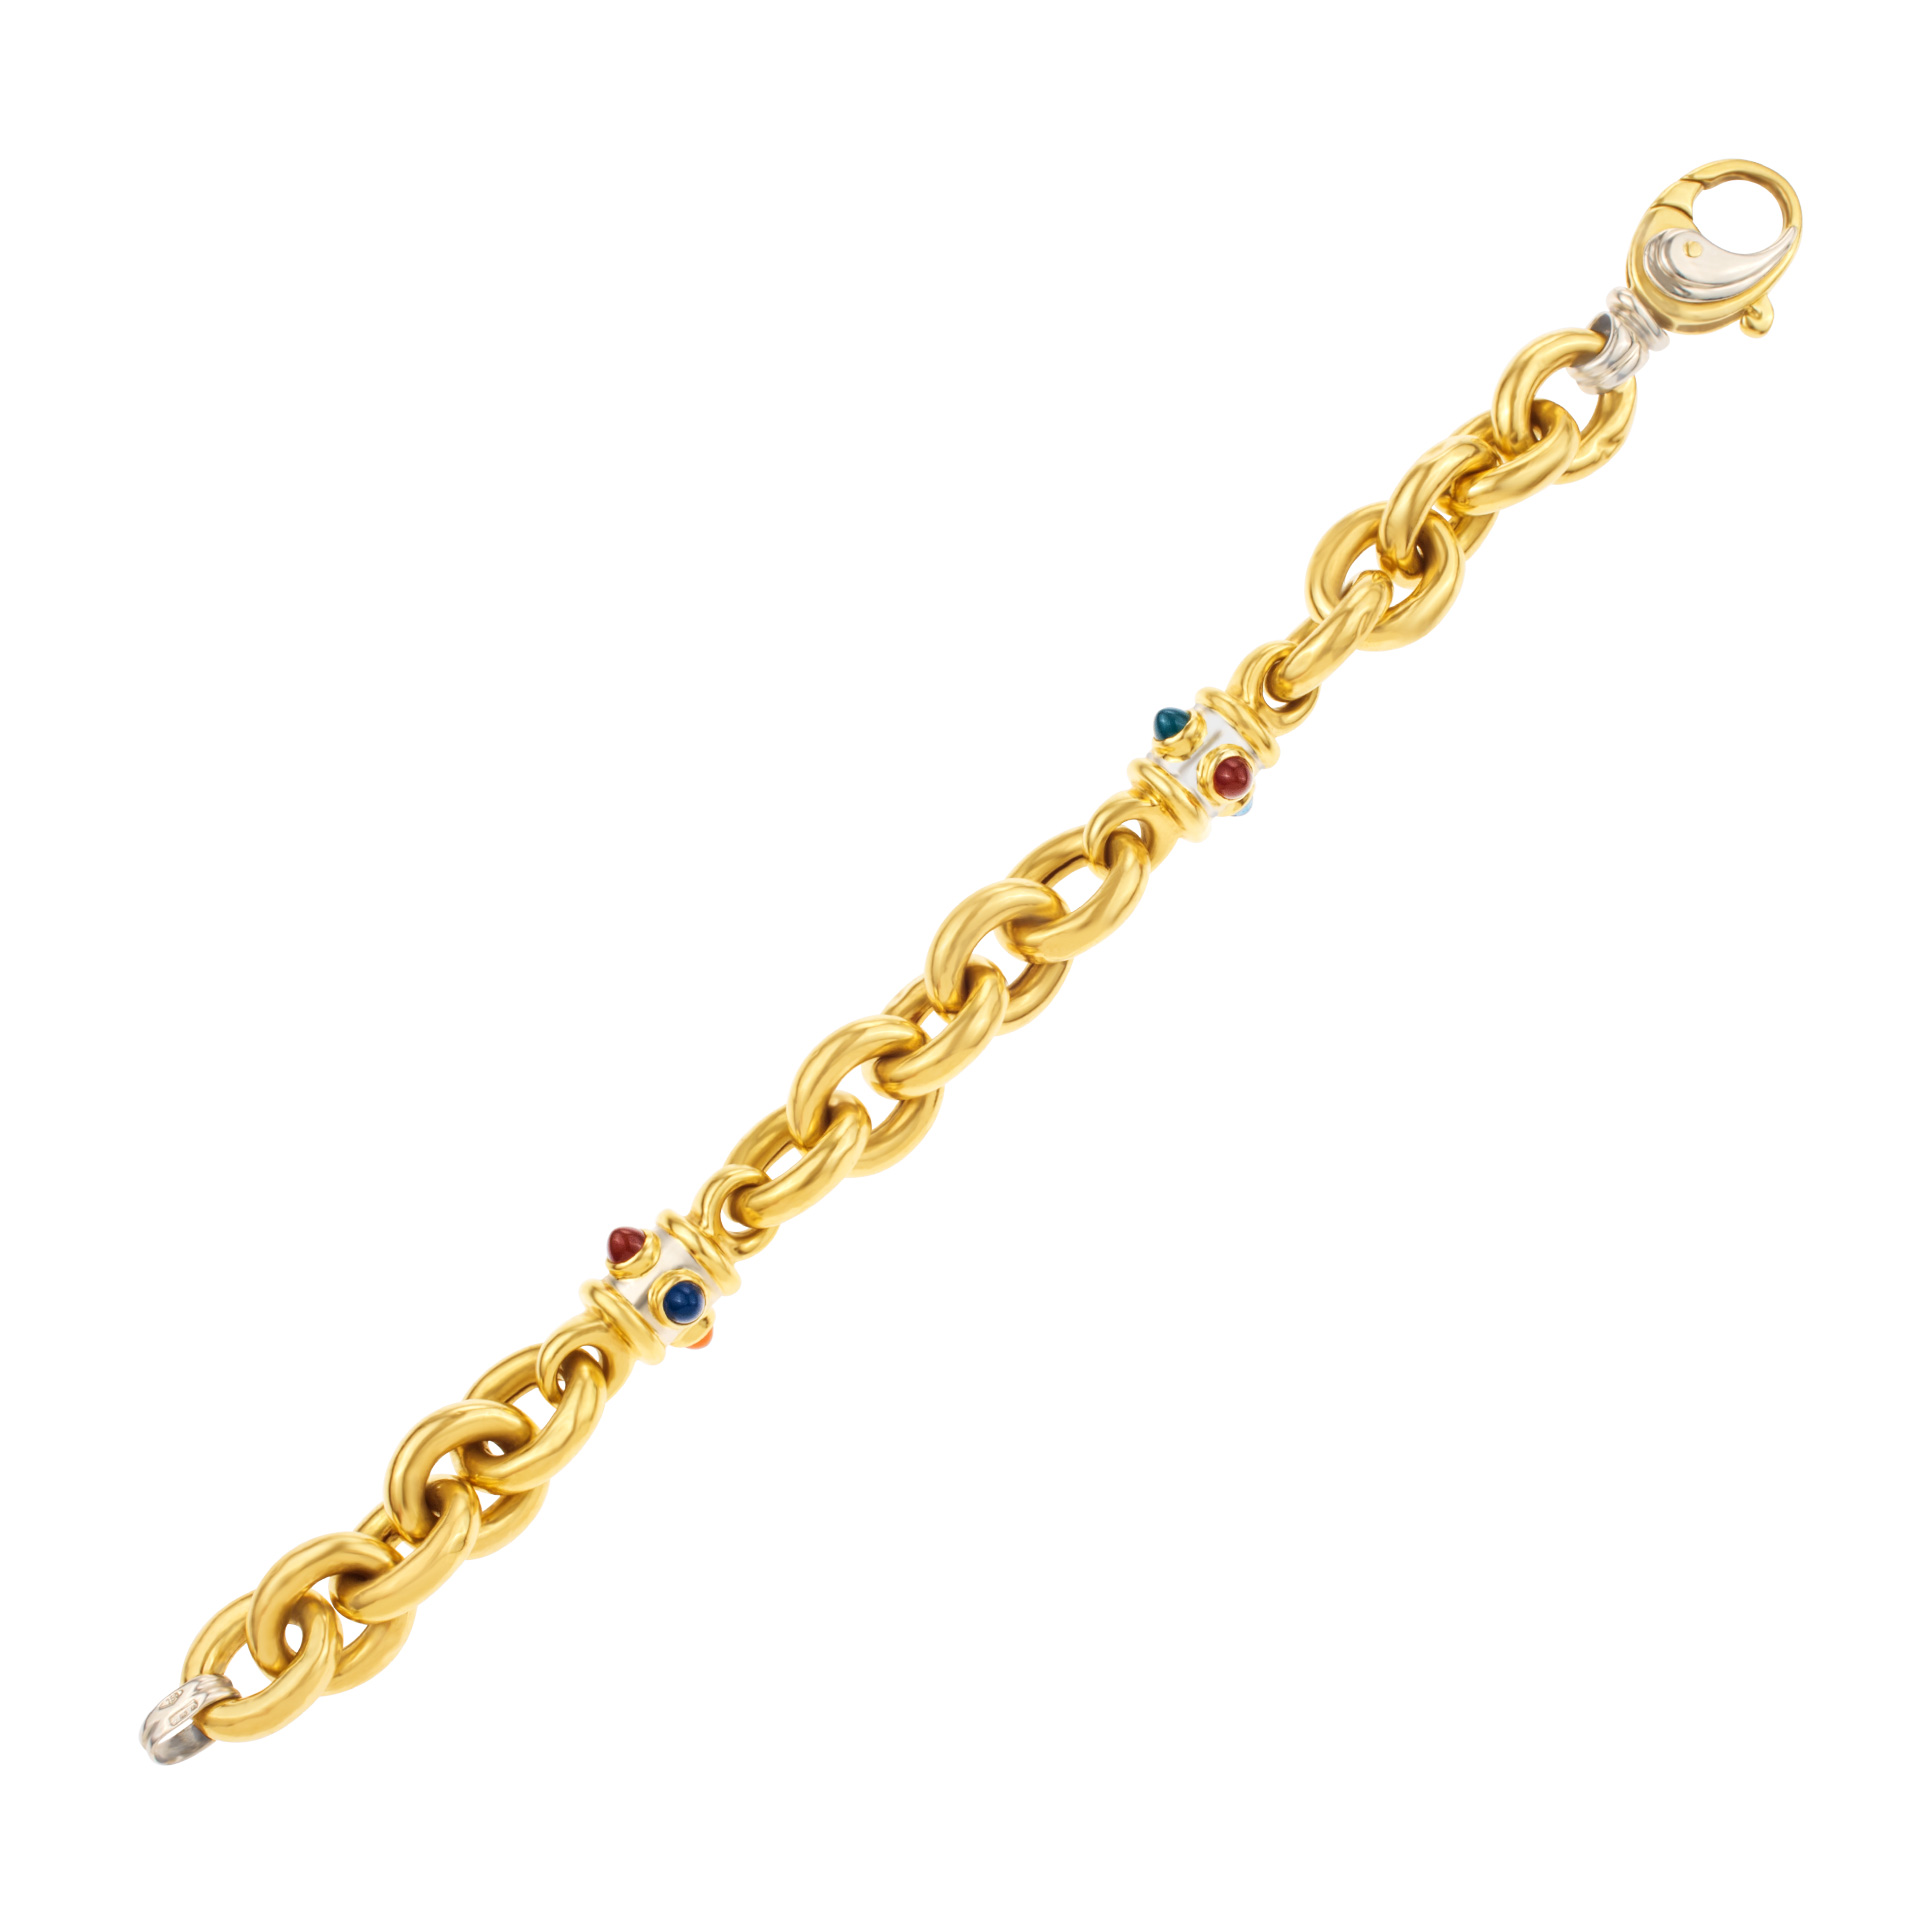 Bracelet in 18k with cabochon stones image 1